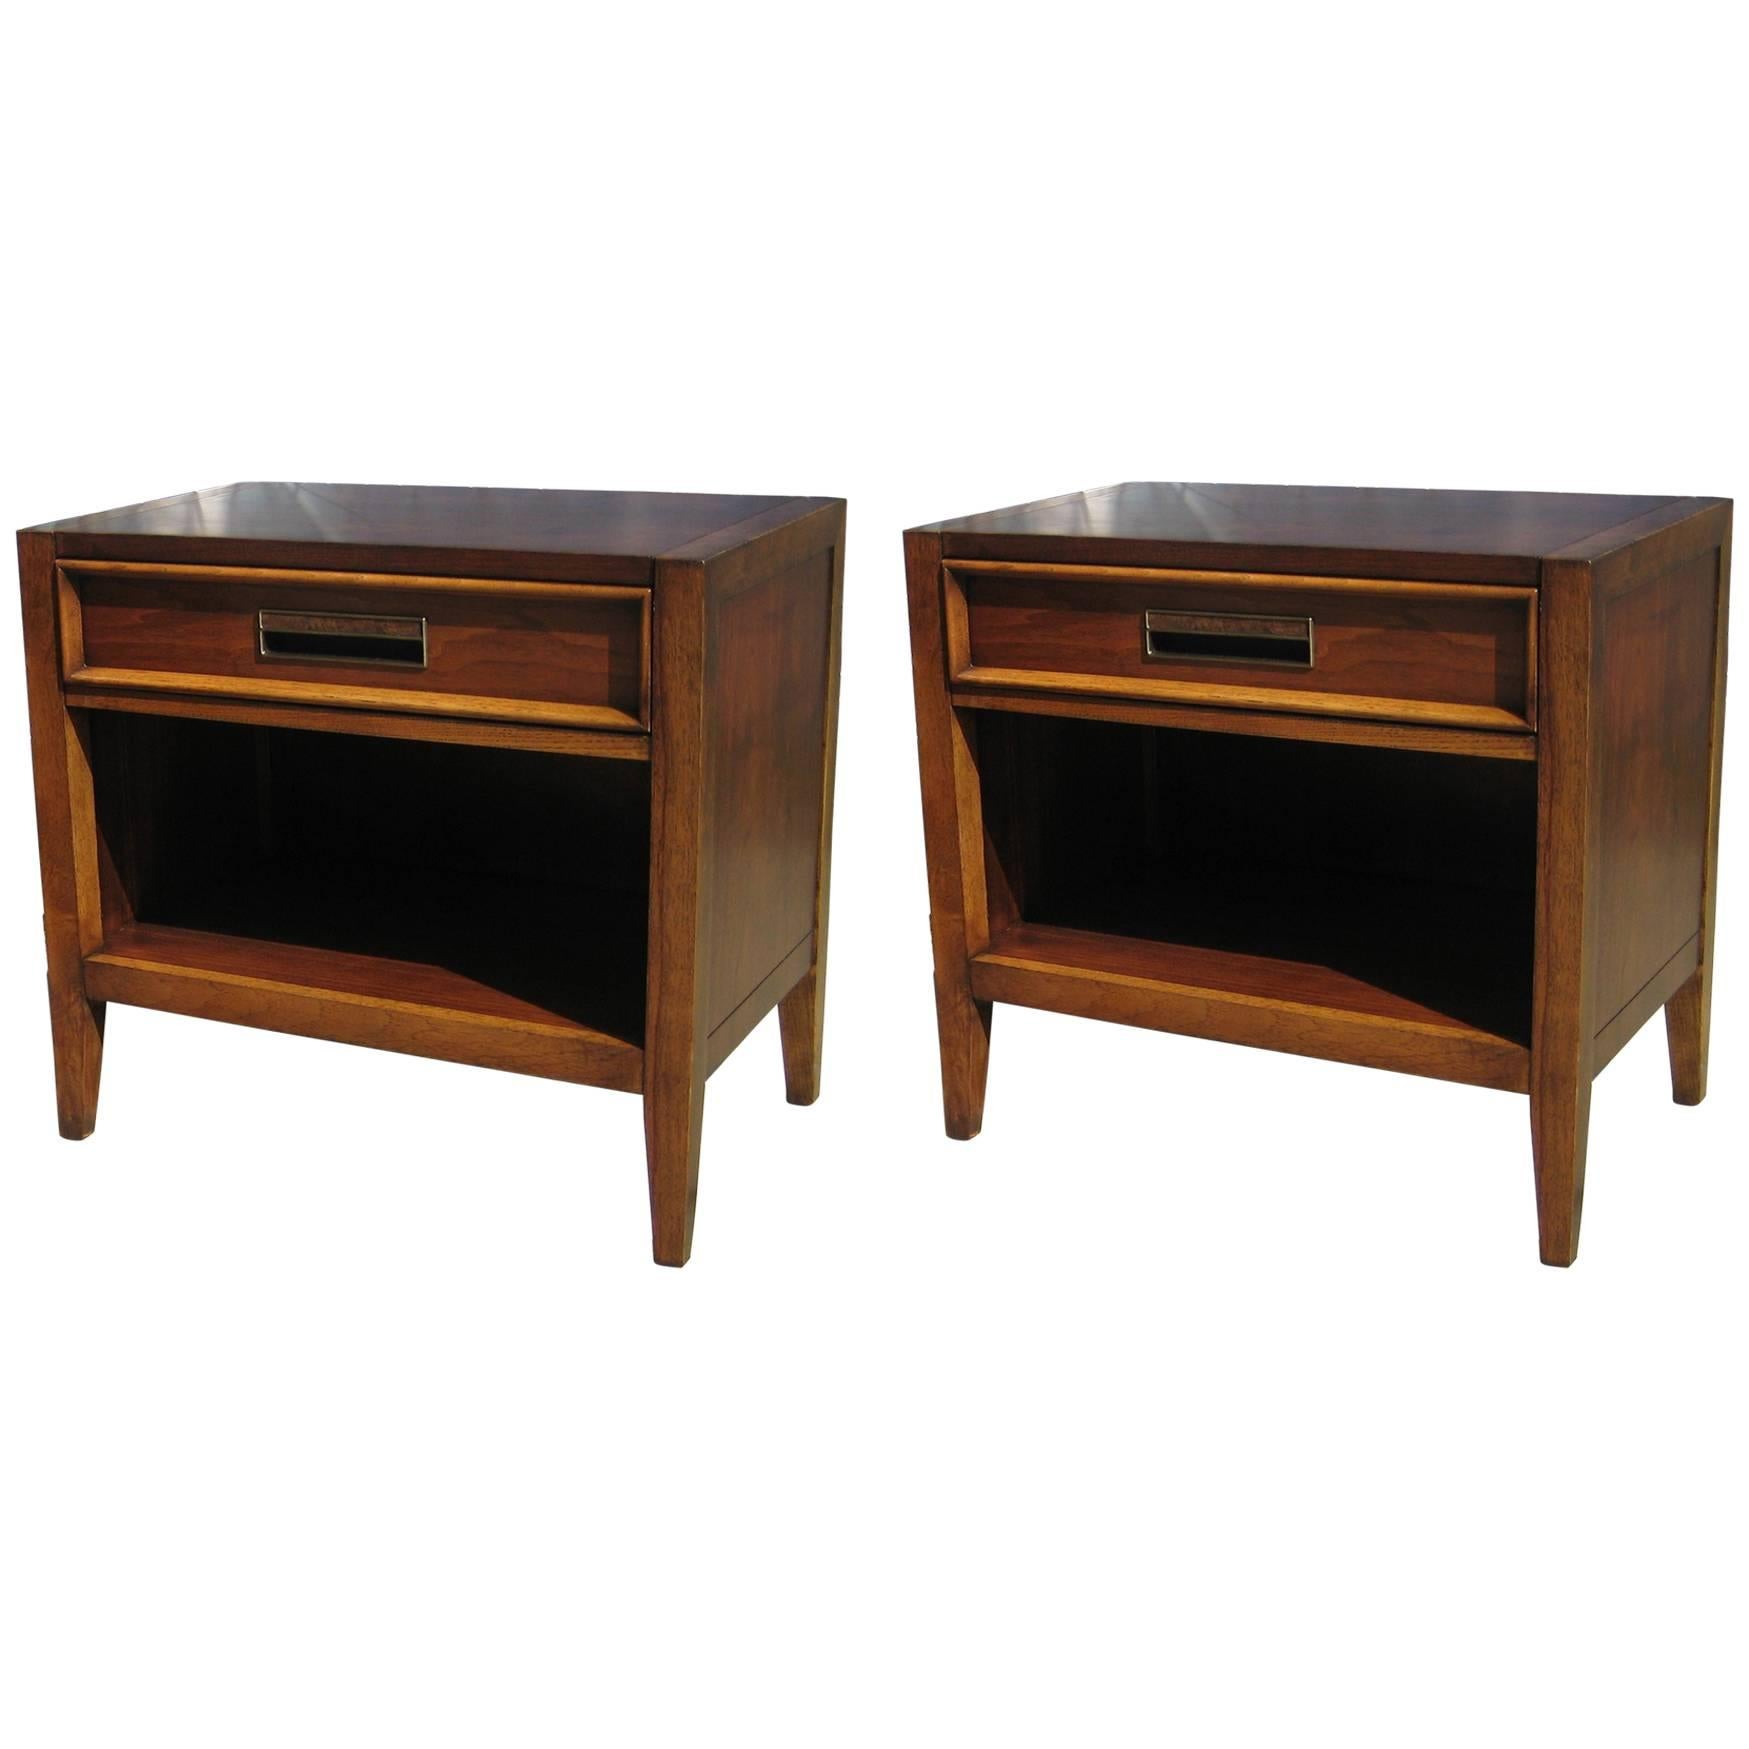 Pair of Bedside Tables in the Manner of Edward Wormley